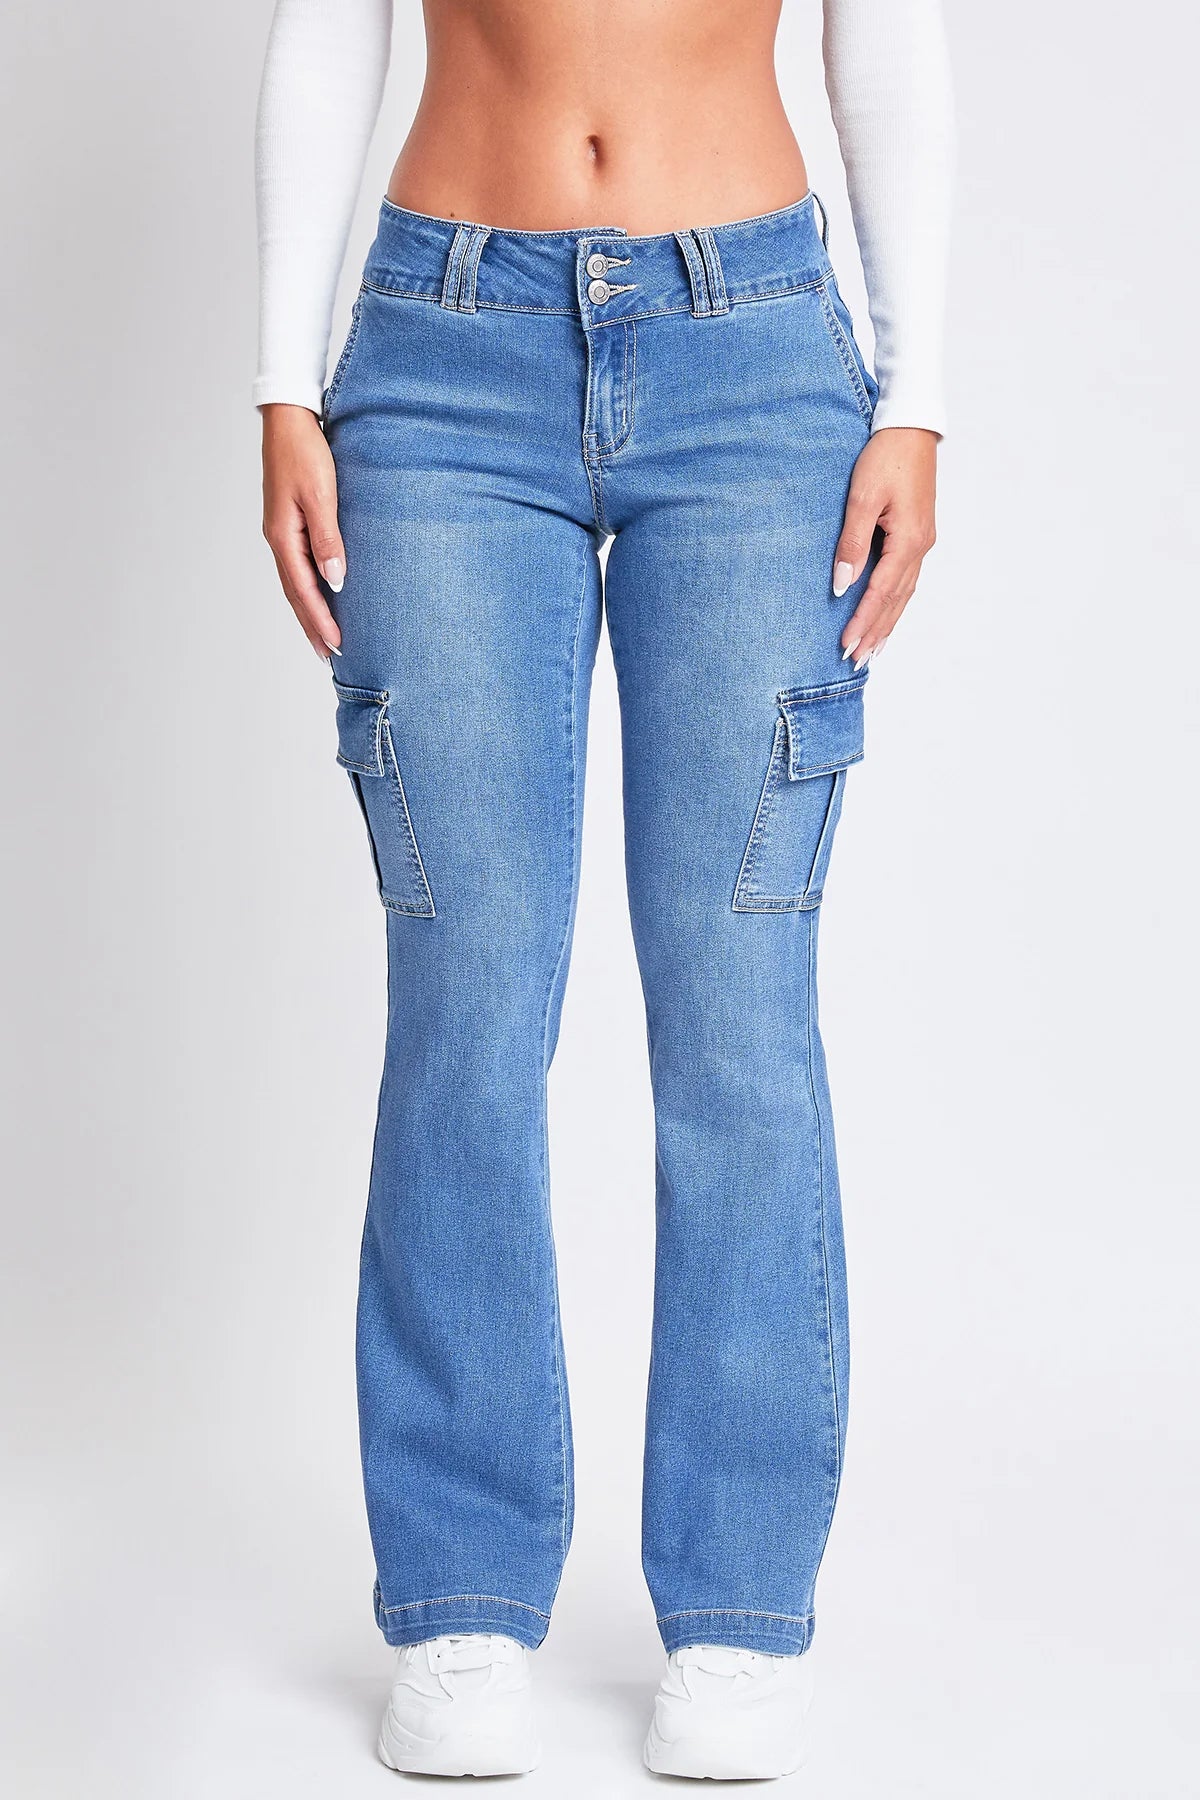 MEDIUM WASH LOW RISE CARGO FLARE JEANS by YMI